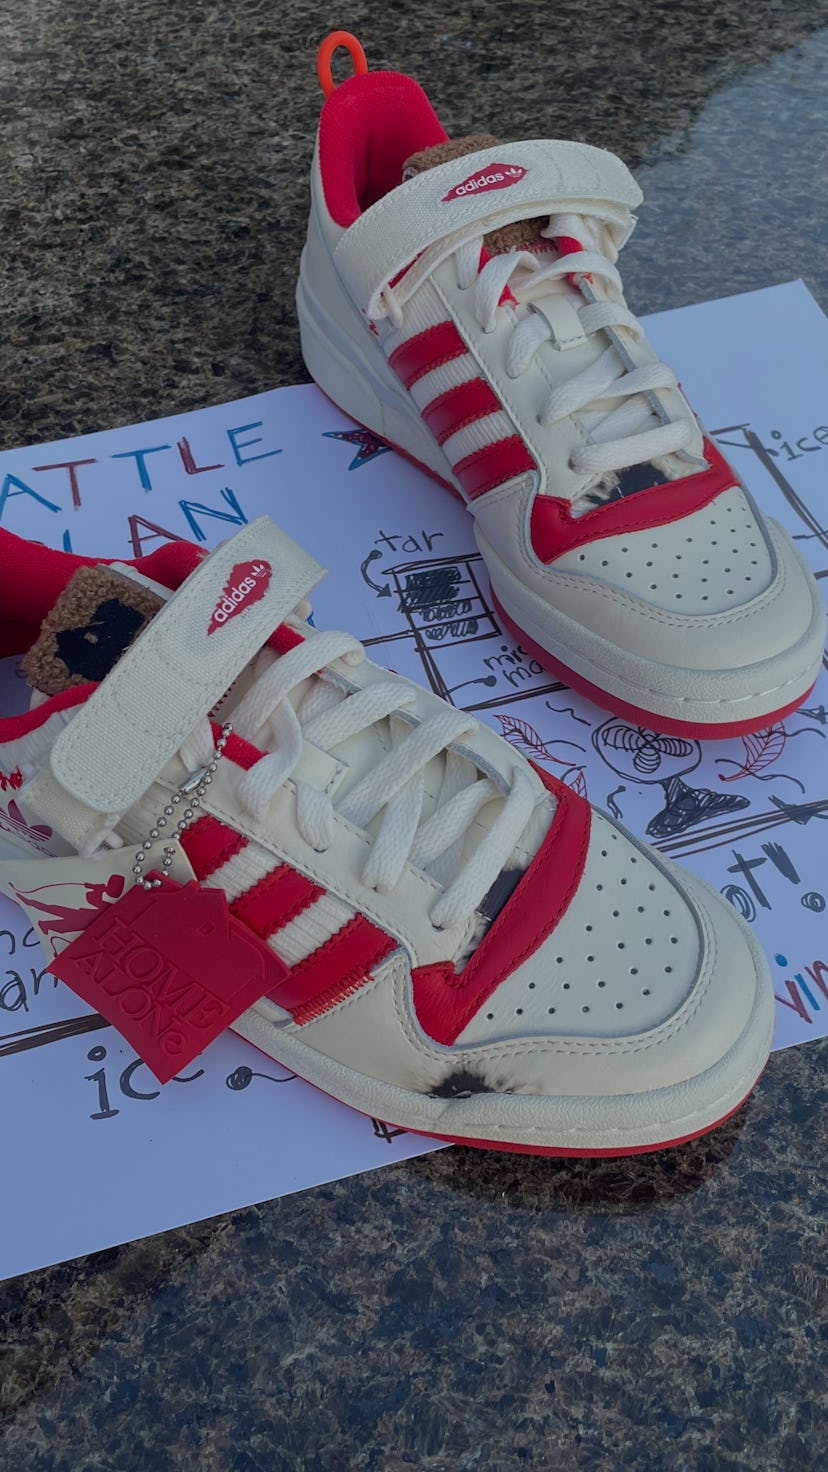 Adidas 'Home Alone' Forum Low sneakers